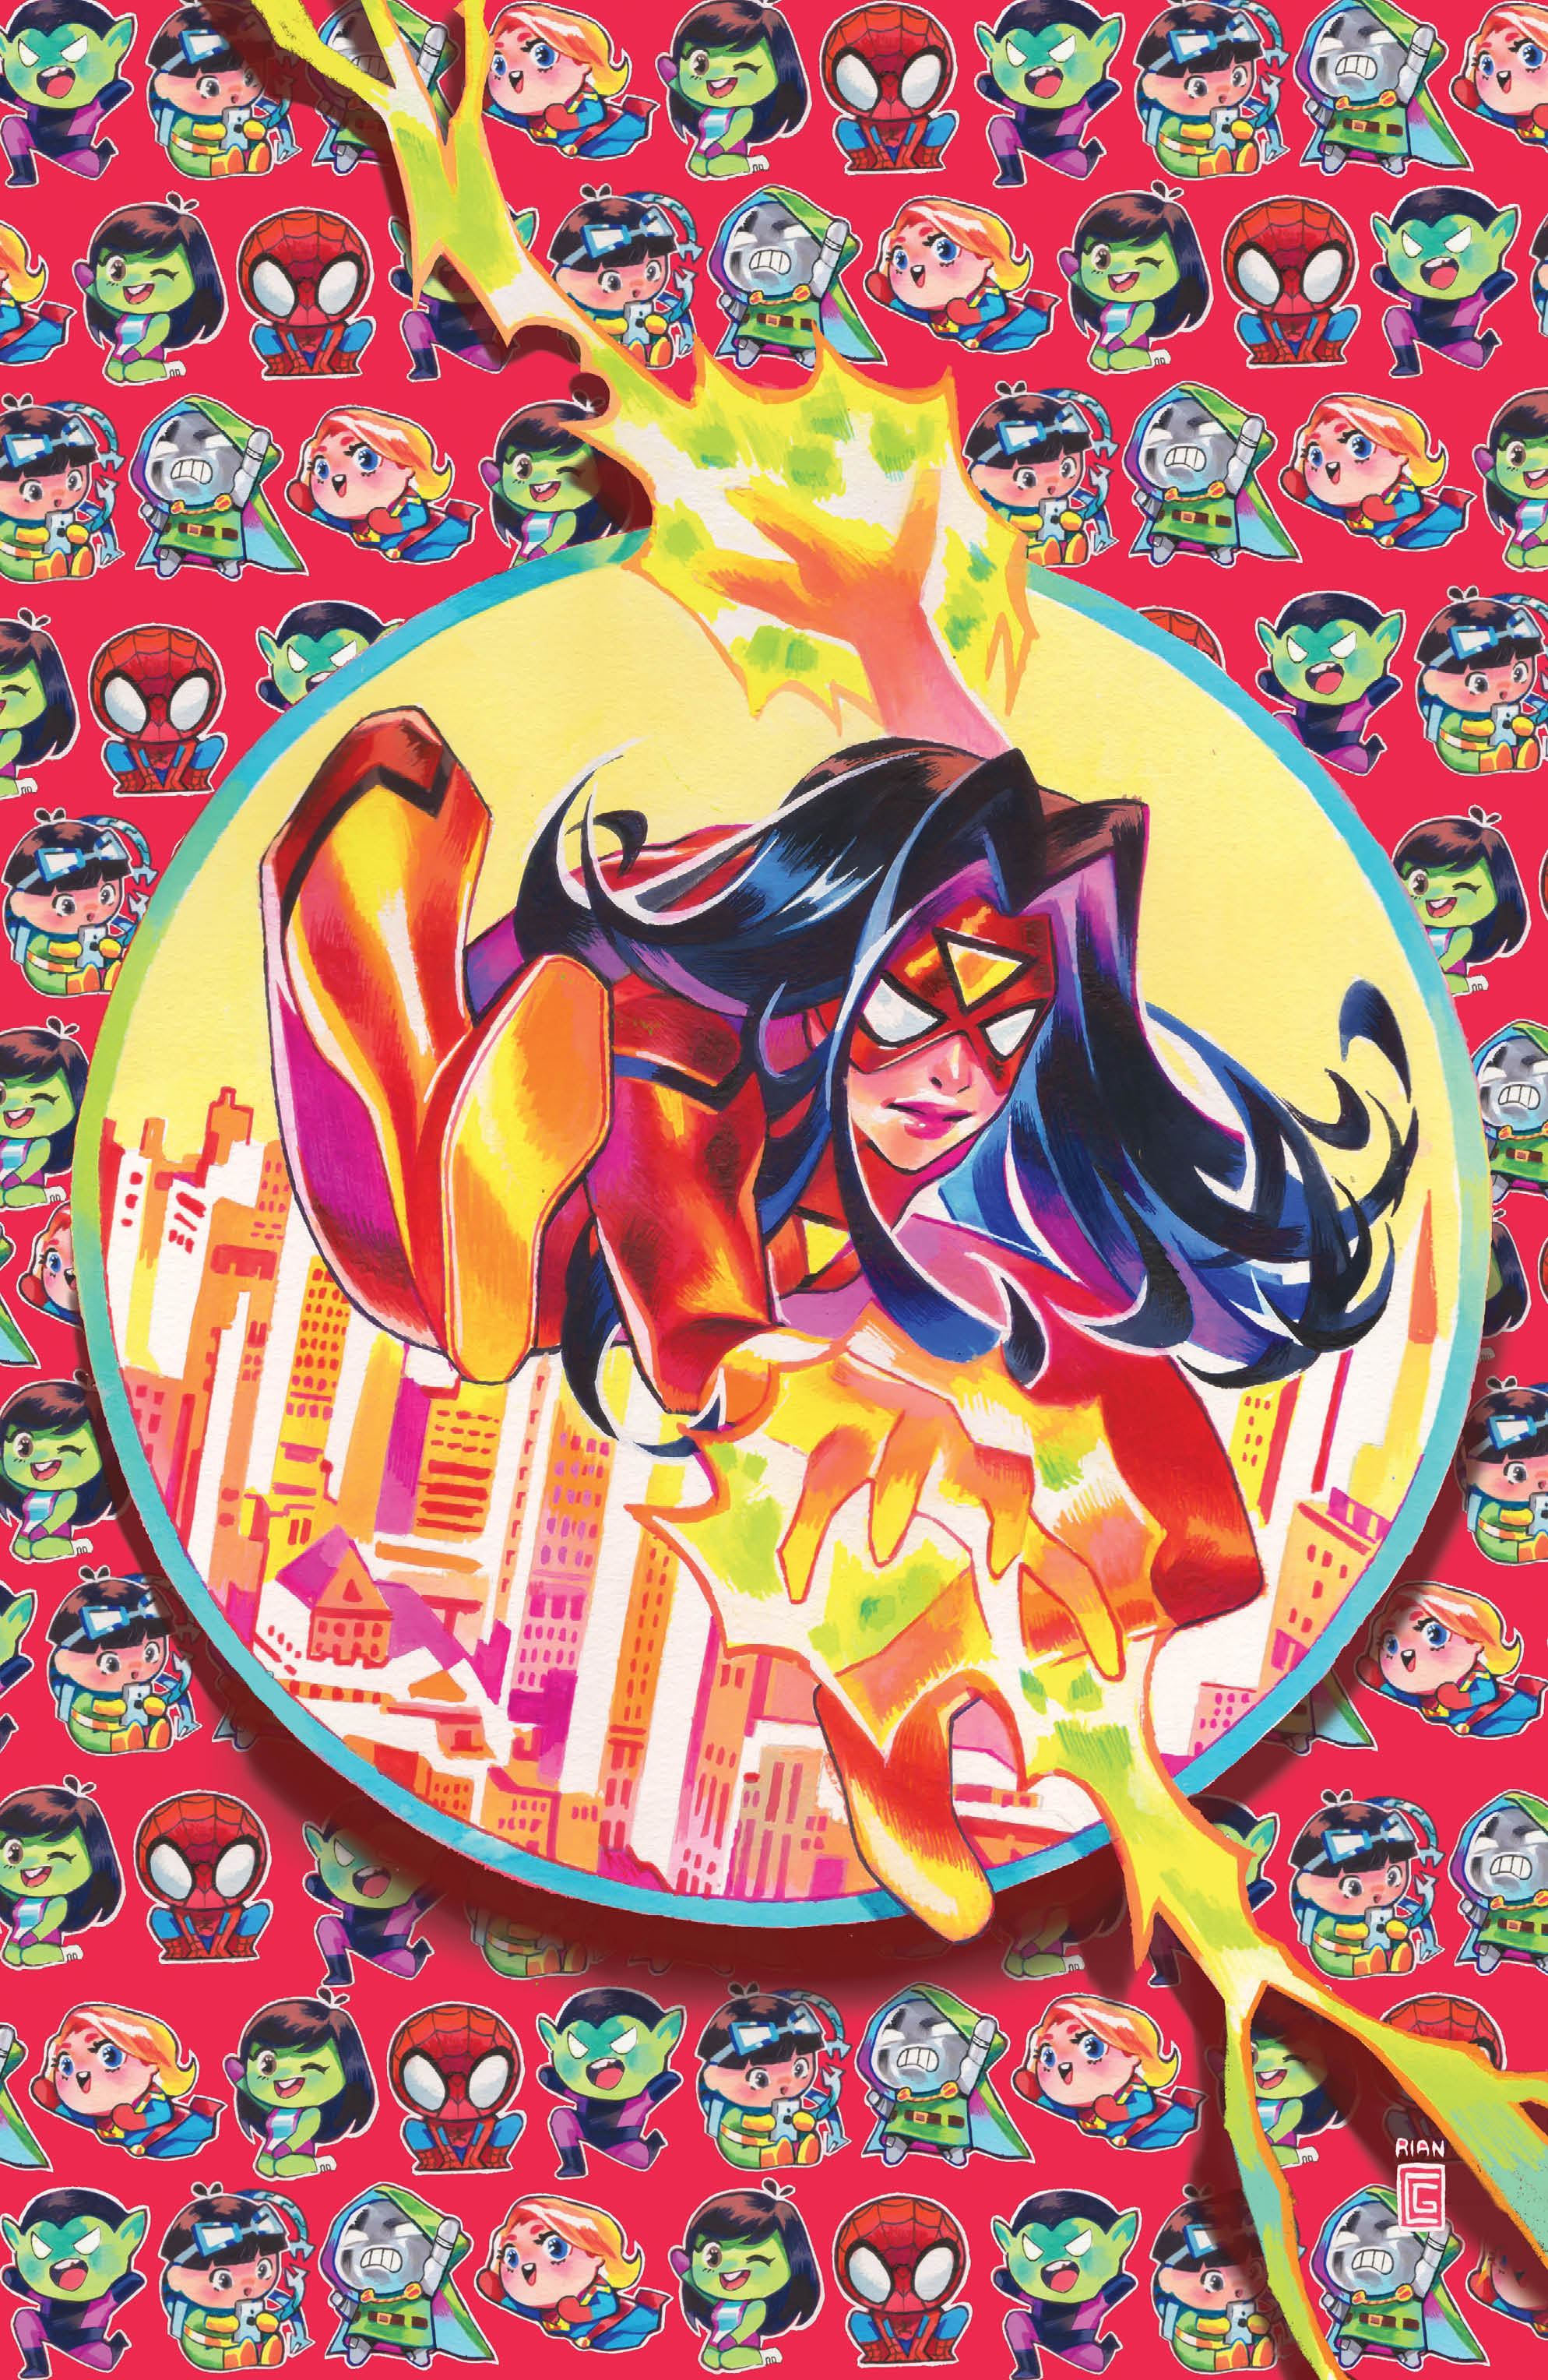 SPIDER-WOMAN #5 COLLECTION